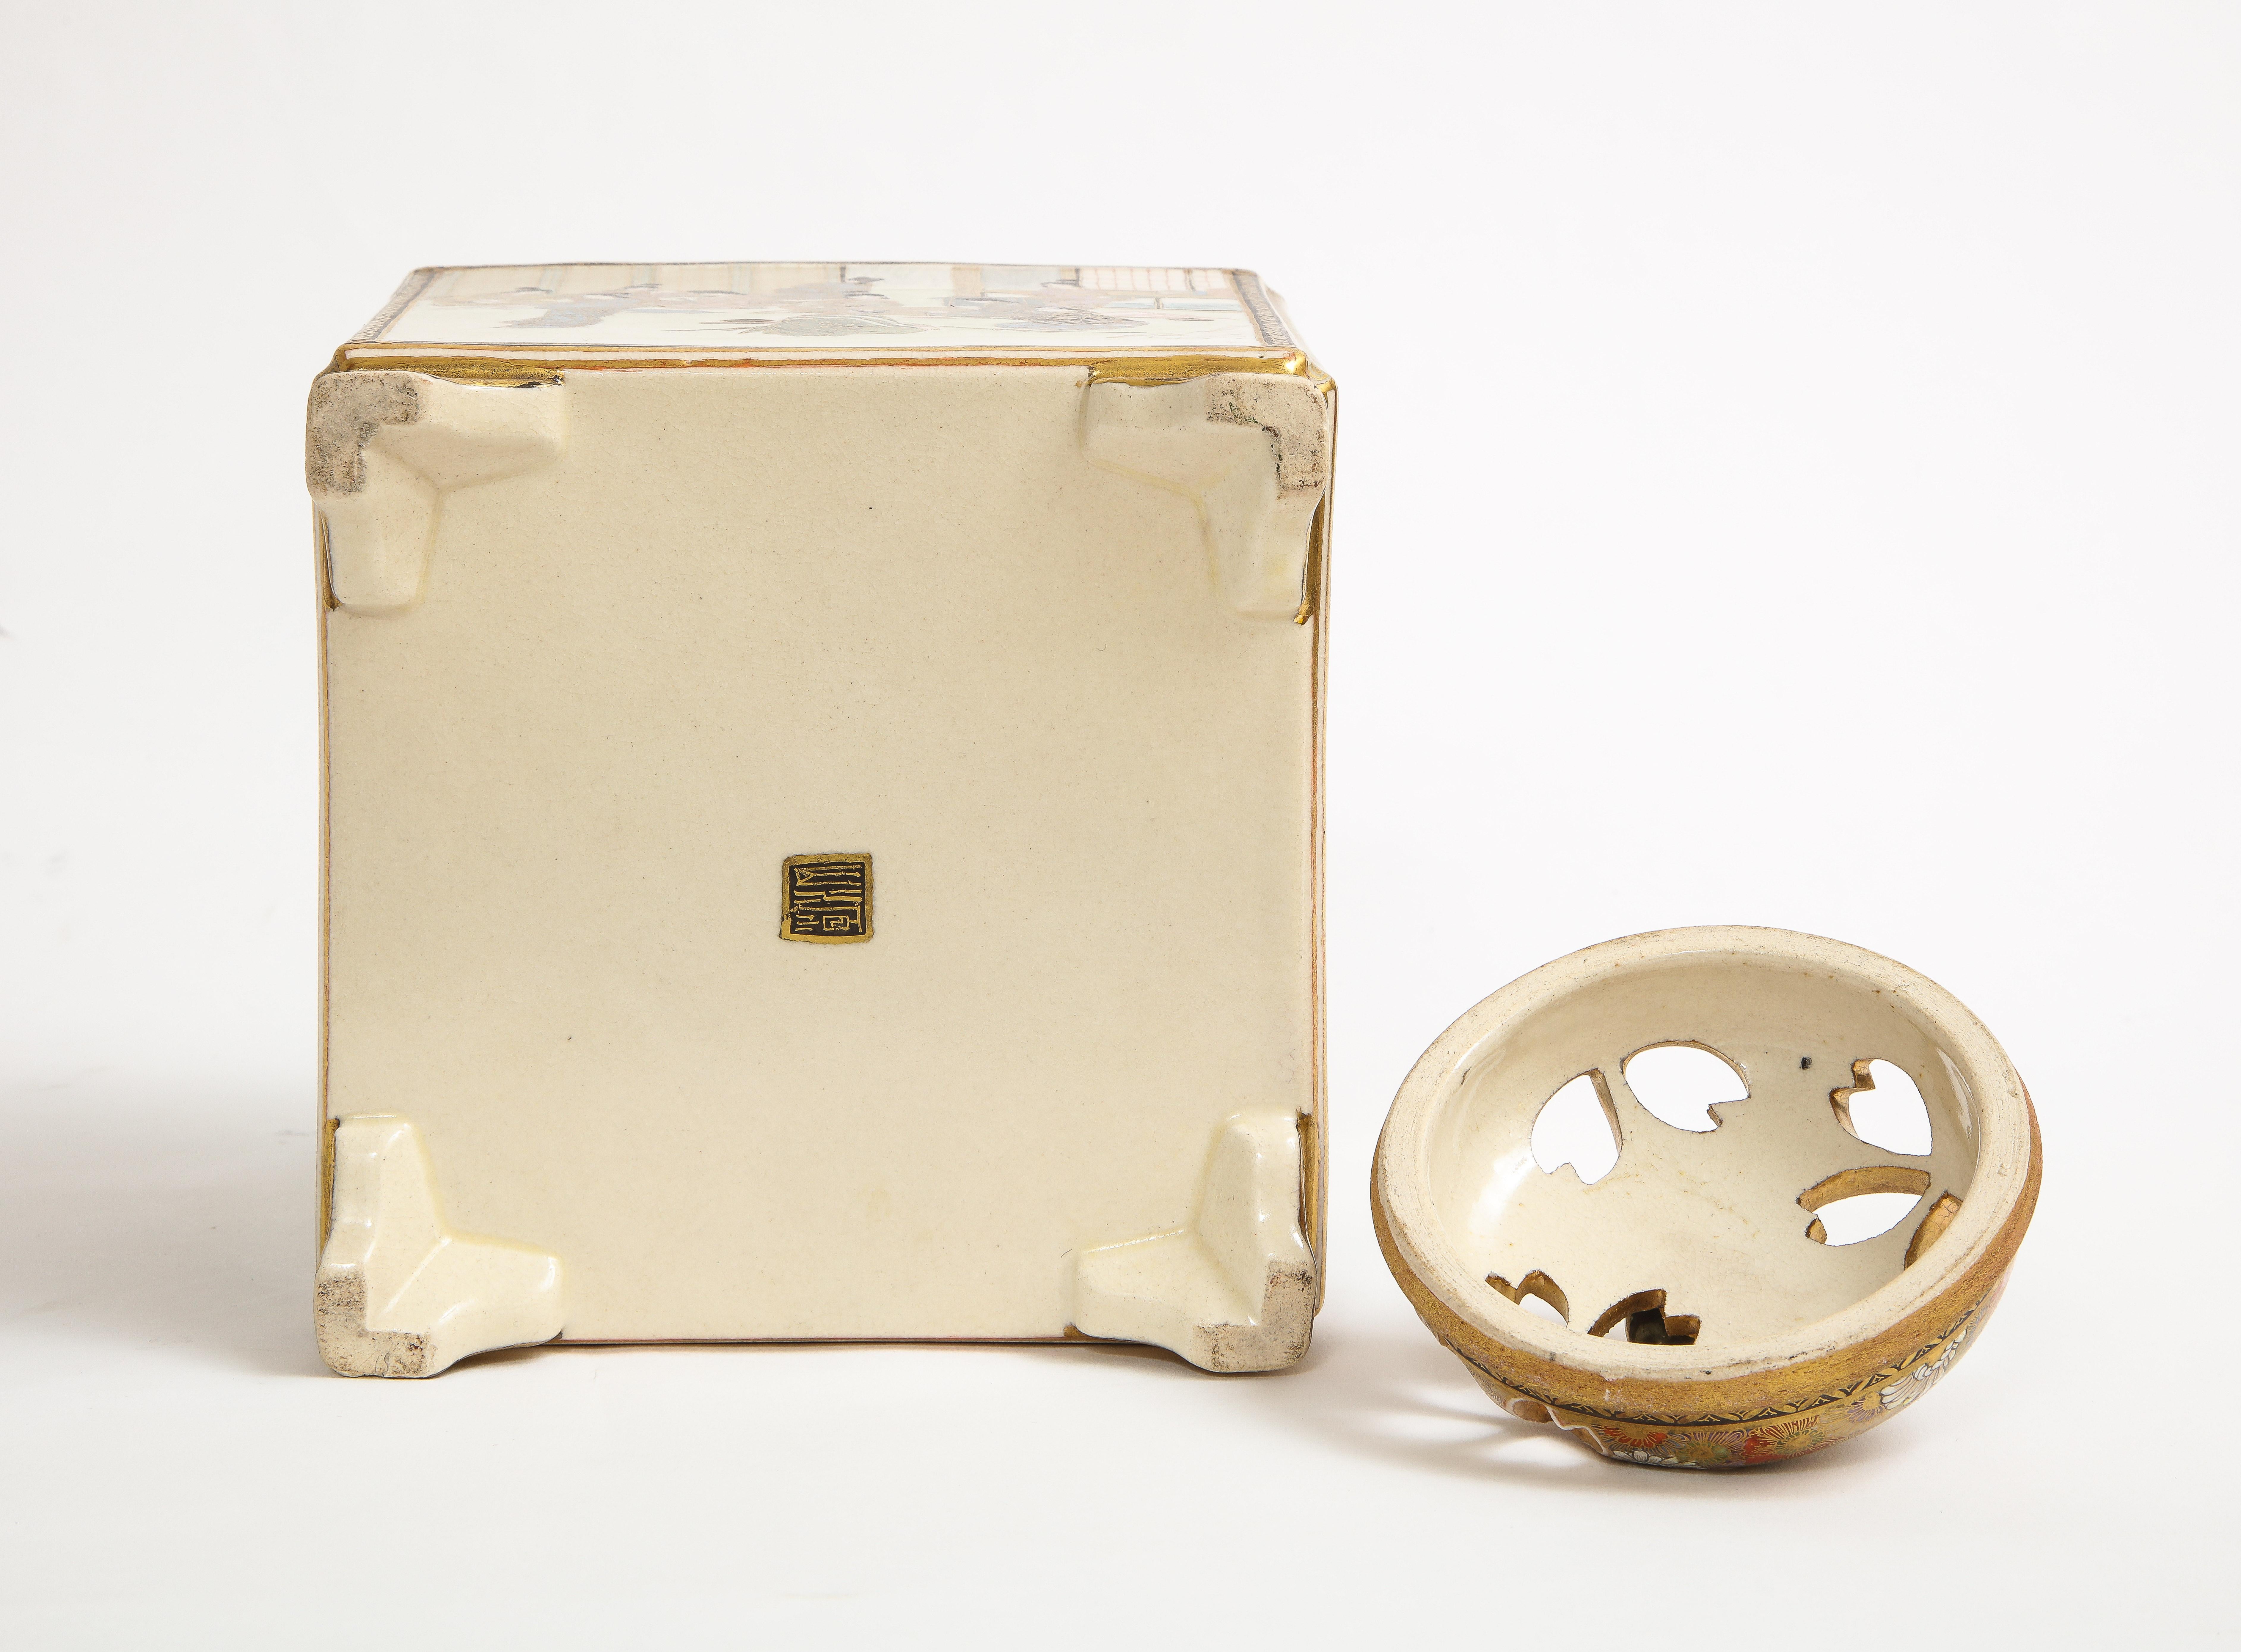 A Japanese Meiji Period (1868-1912).Large Satsuma Square Censer And Cover, Mark 7